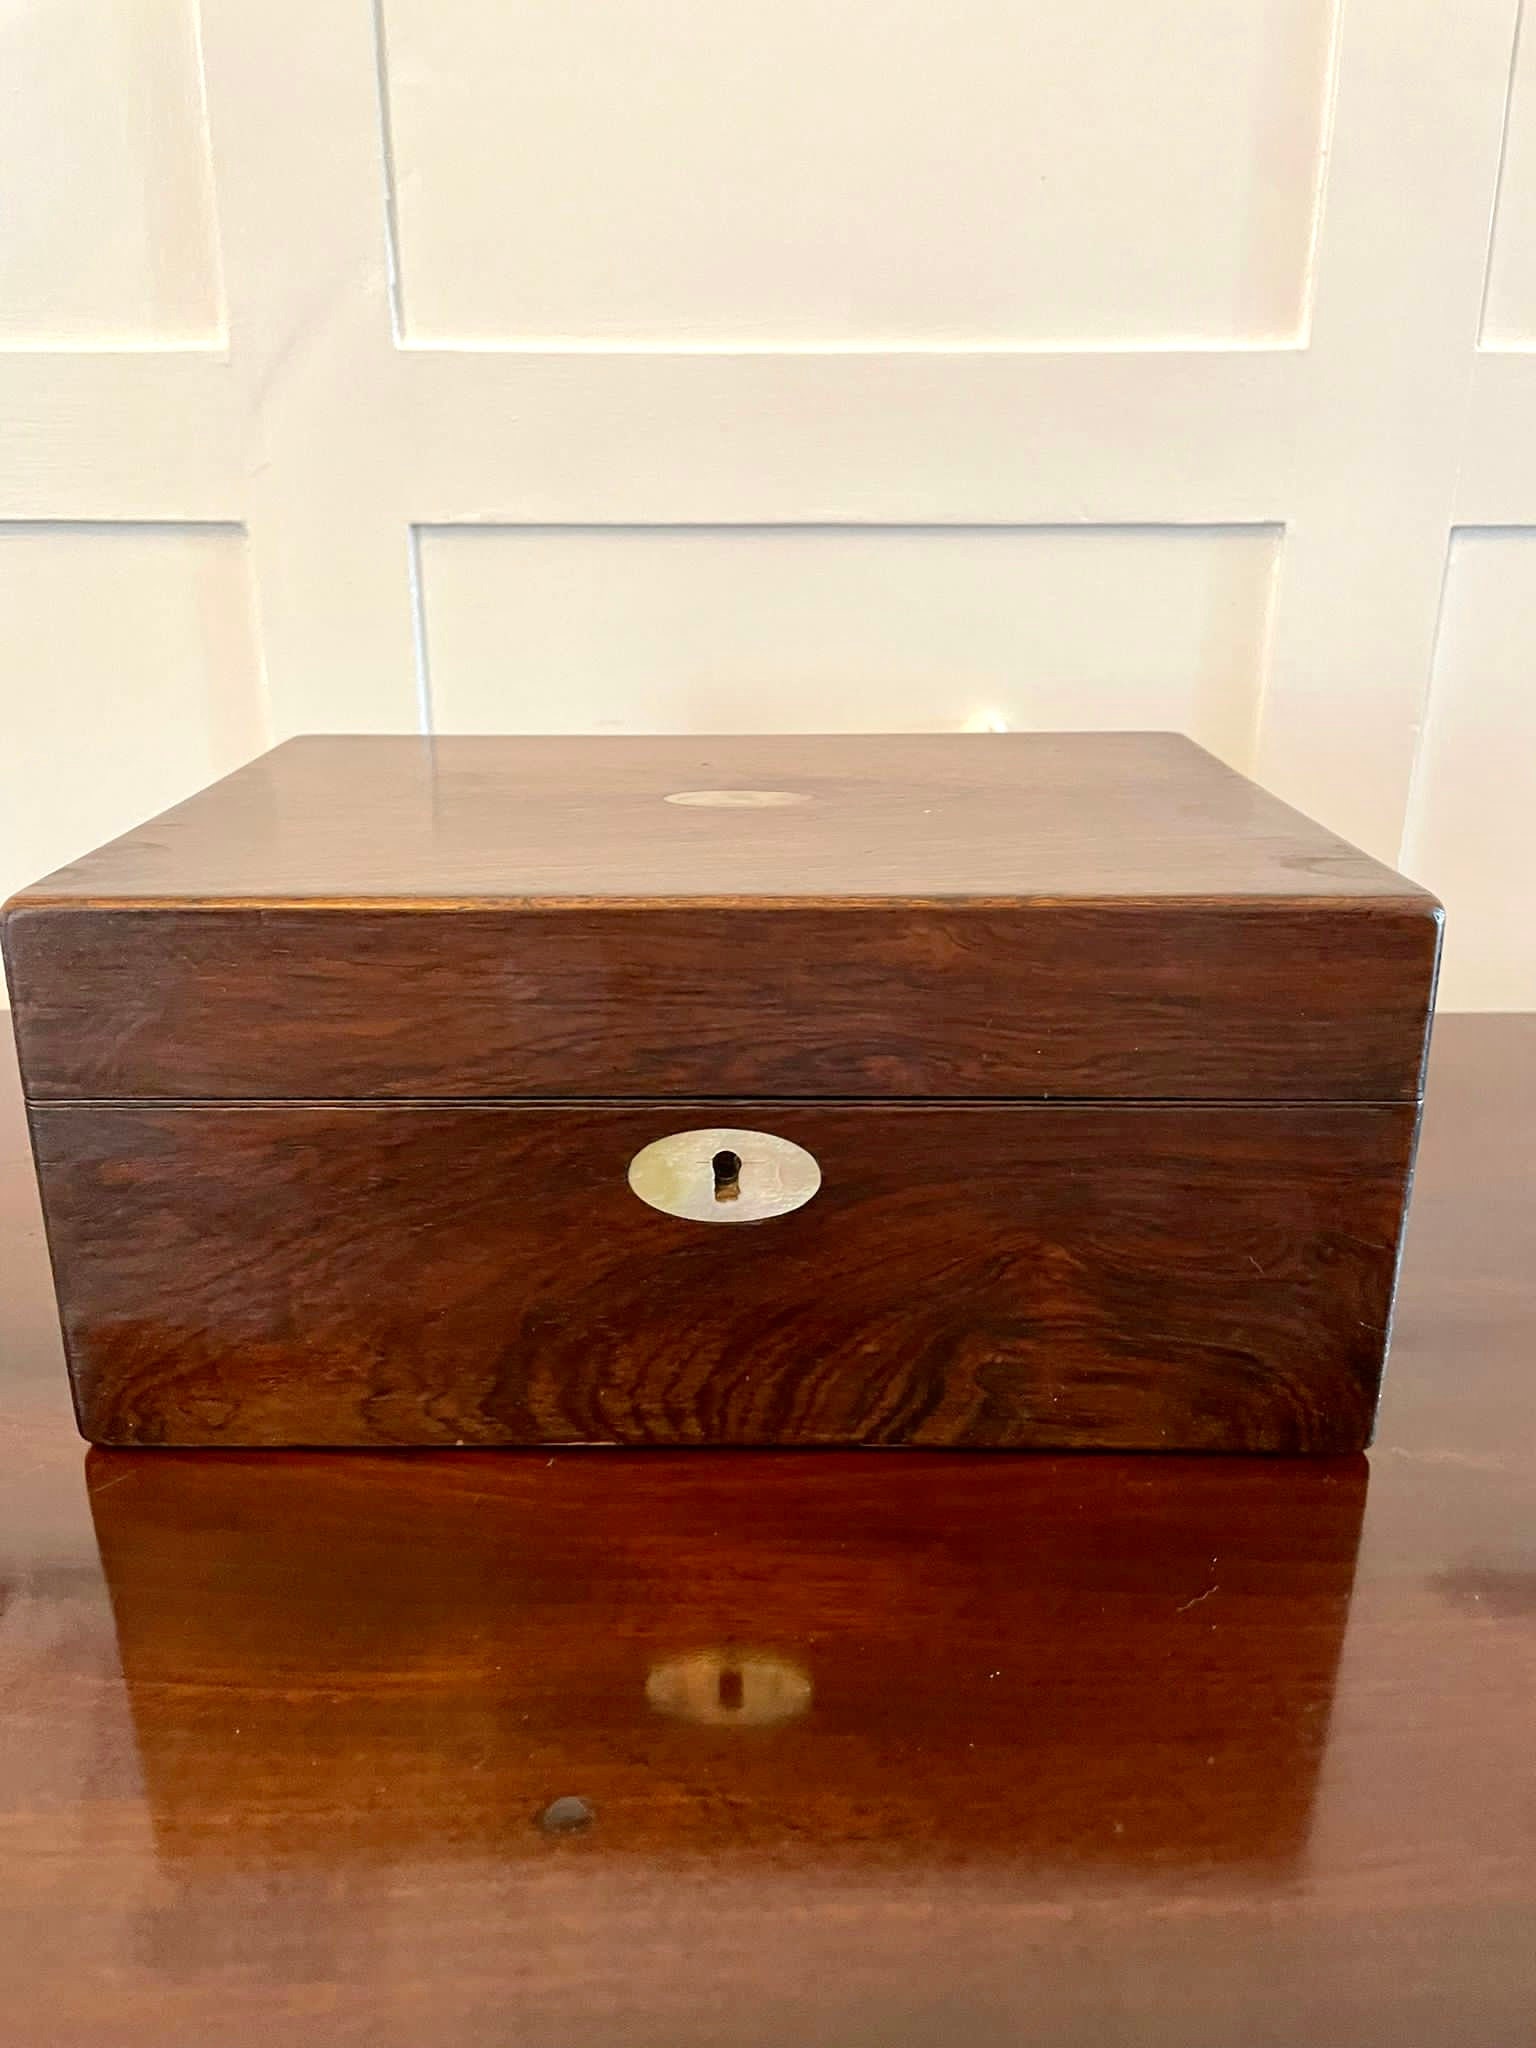 Ajuny Wooden Jewellery Box Storage Handcarved From Rosewood With Brass Inlay Decorative Gifts 